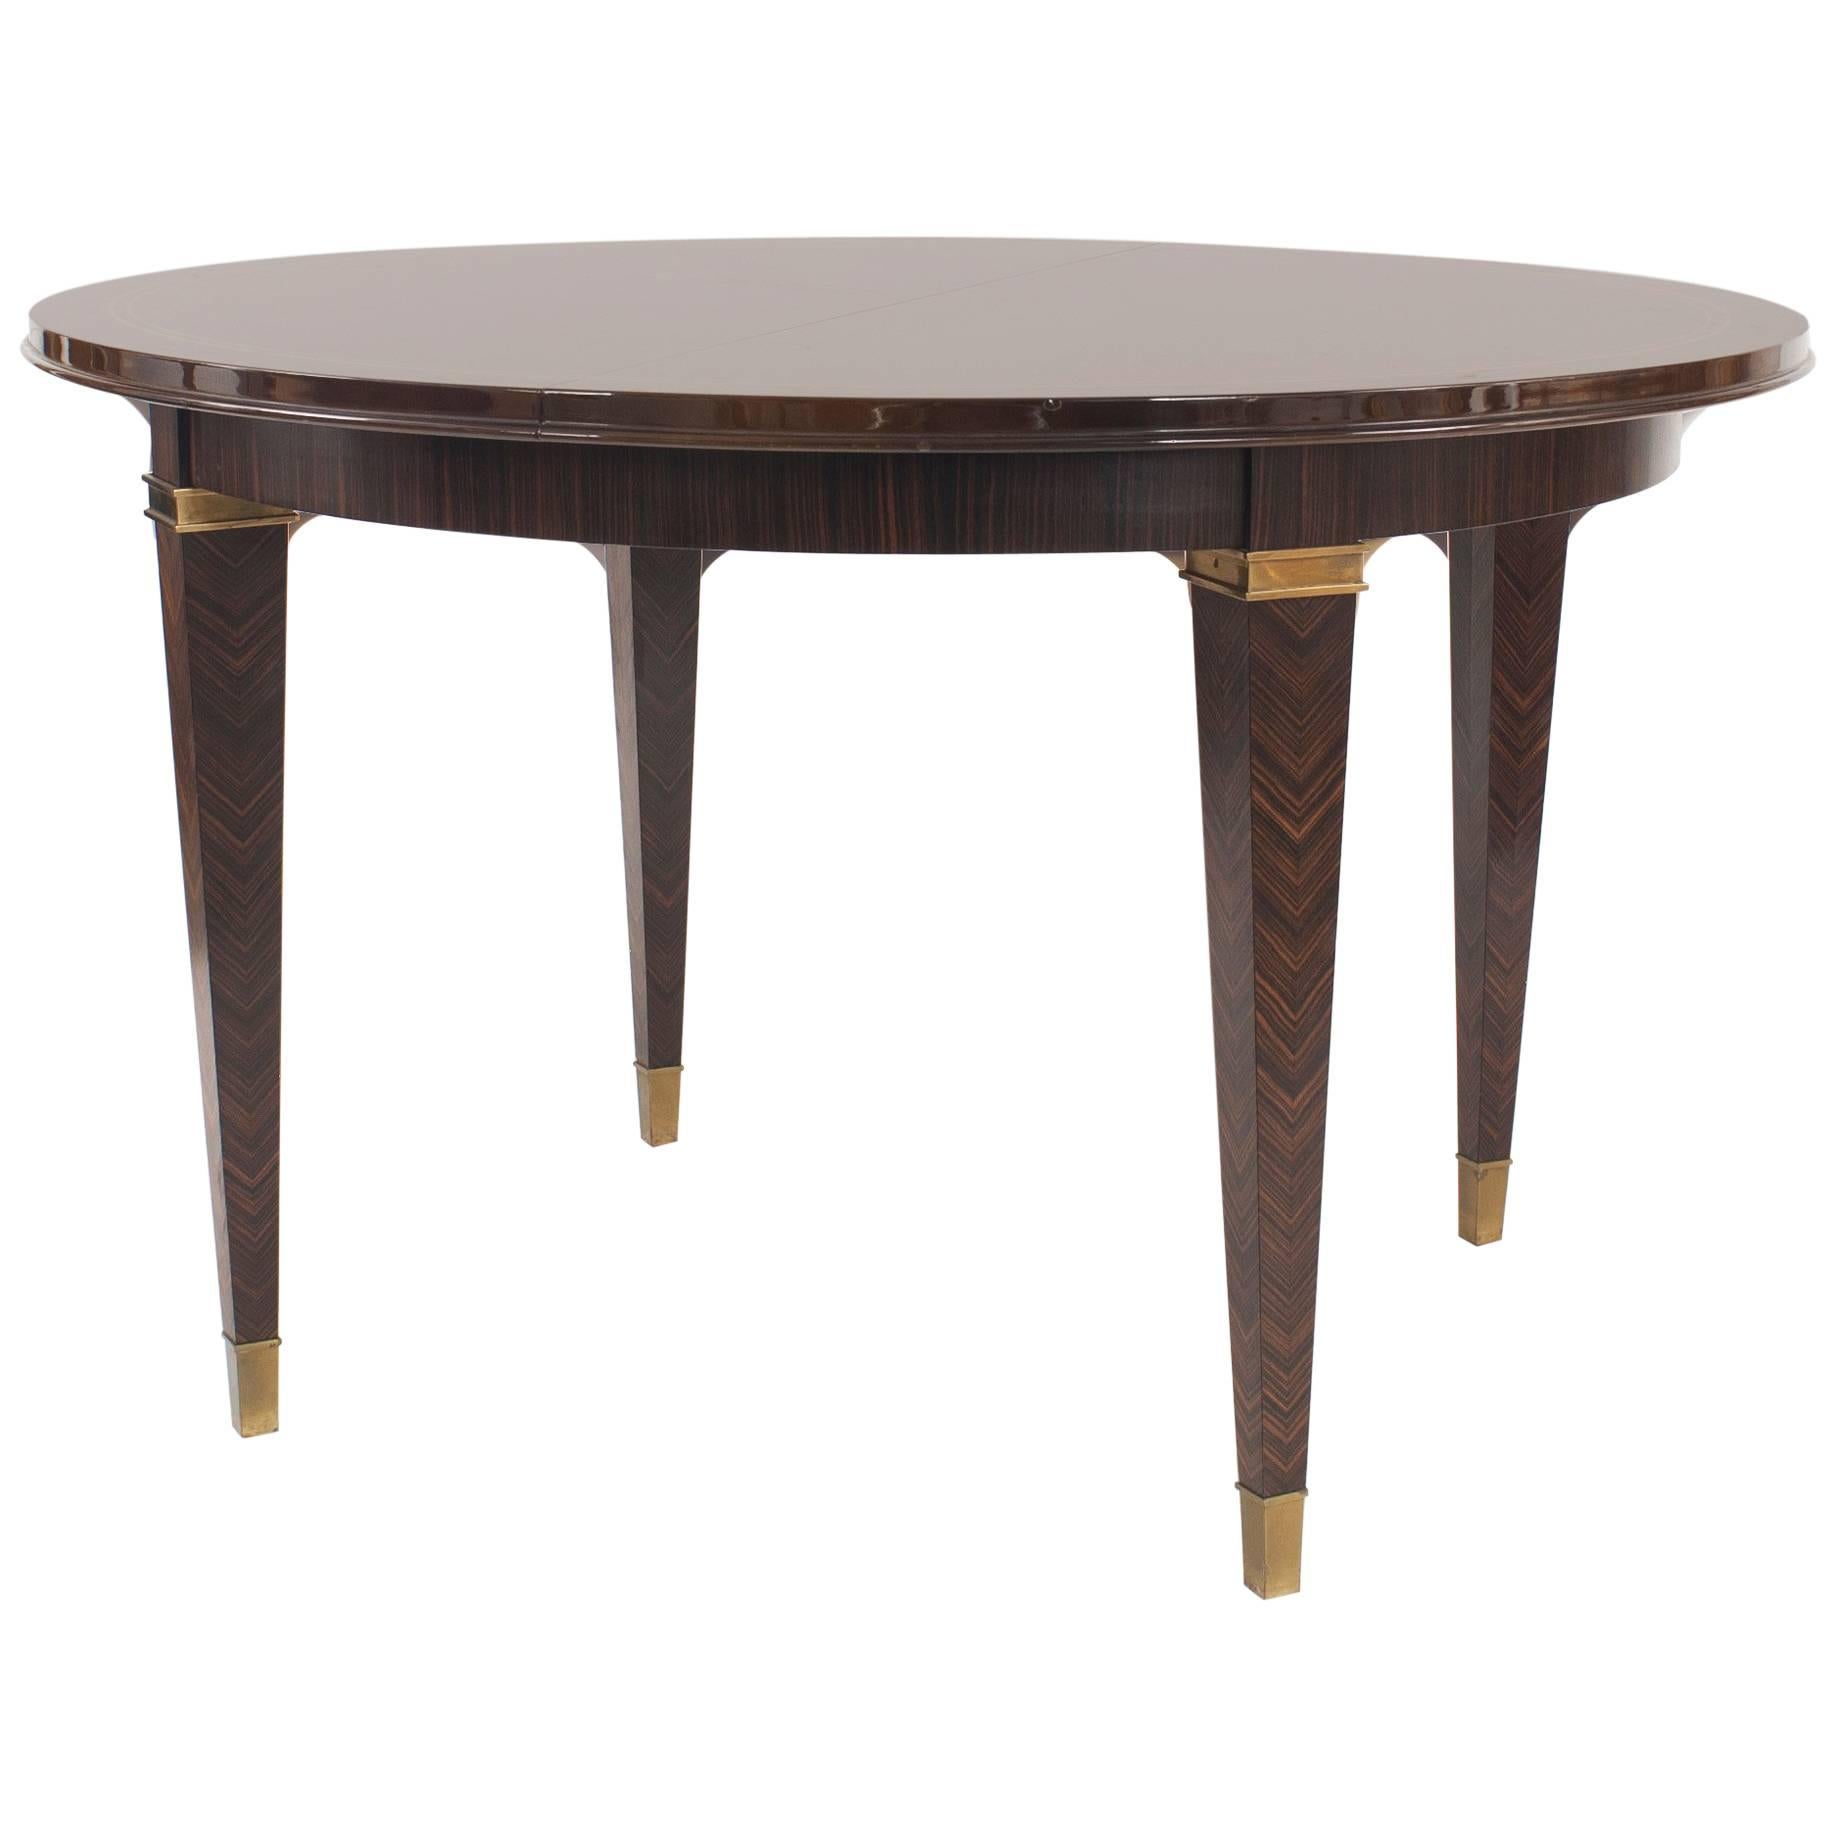 French Art Deco Macassar Ebony Dining Table, by Dominique